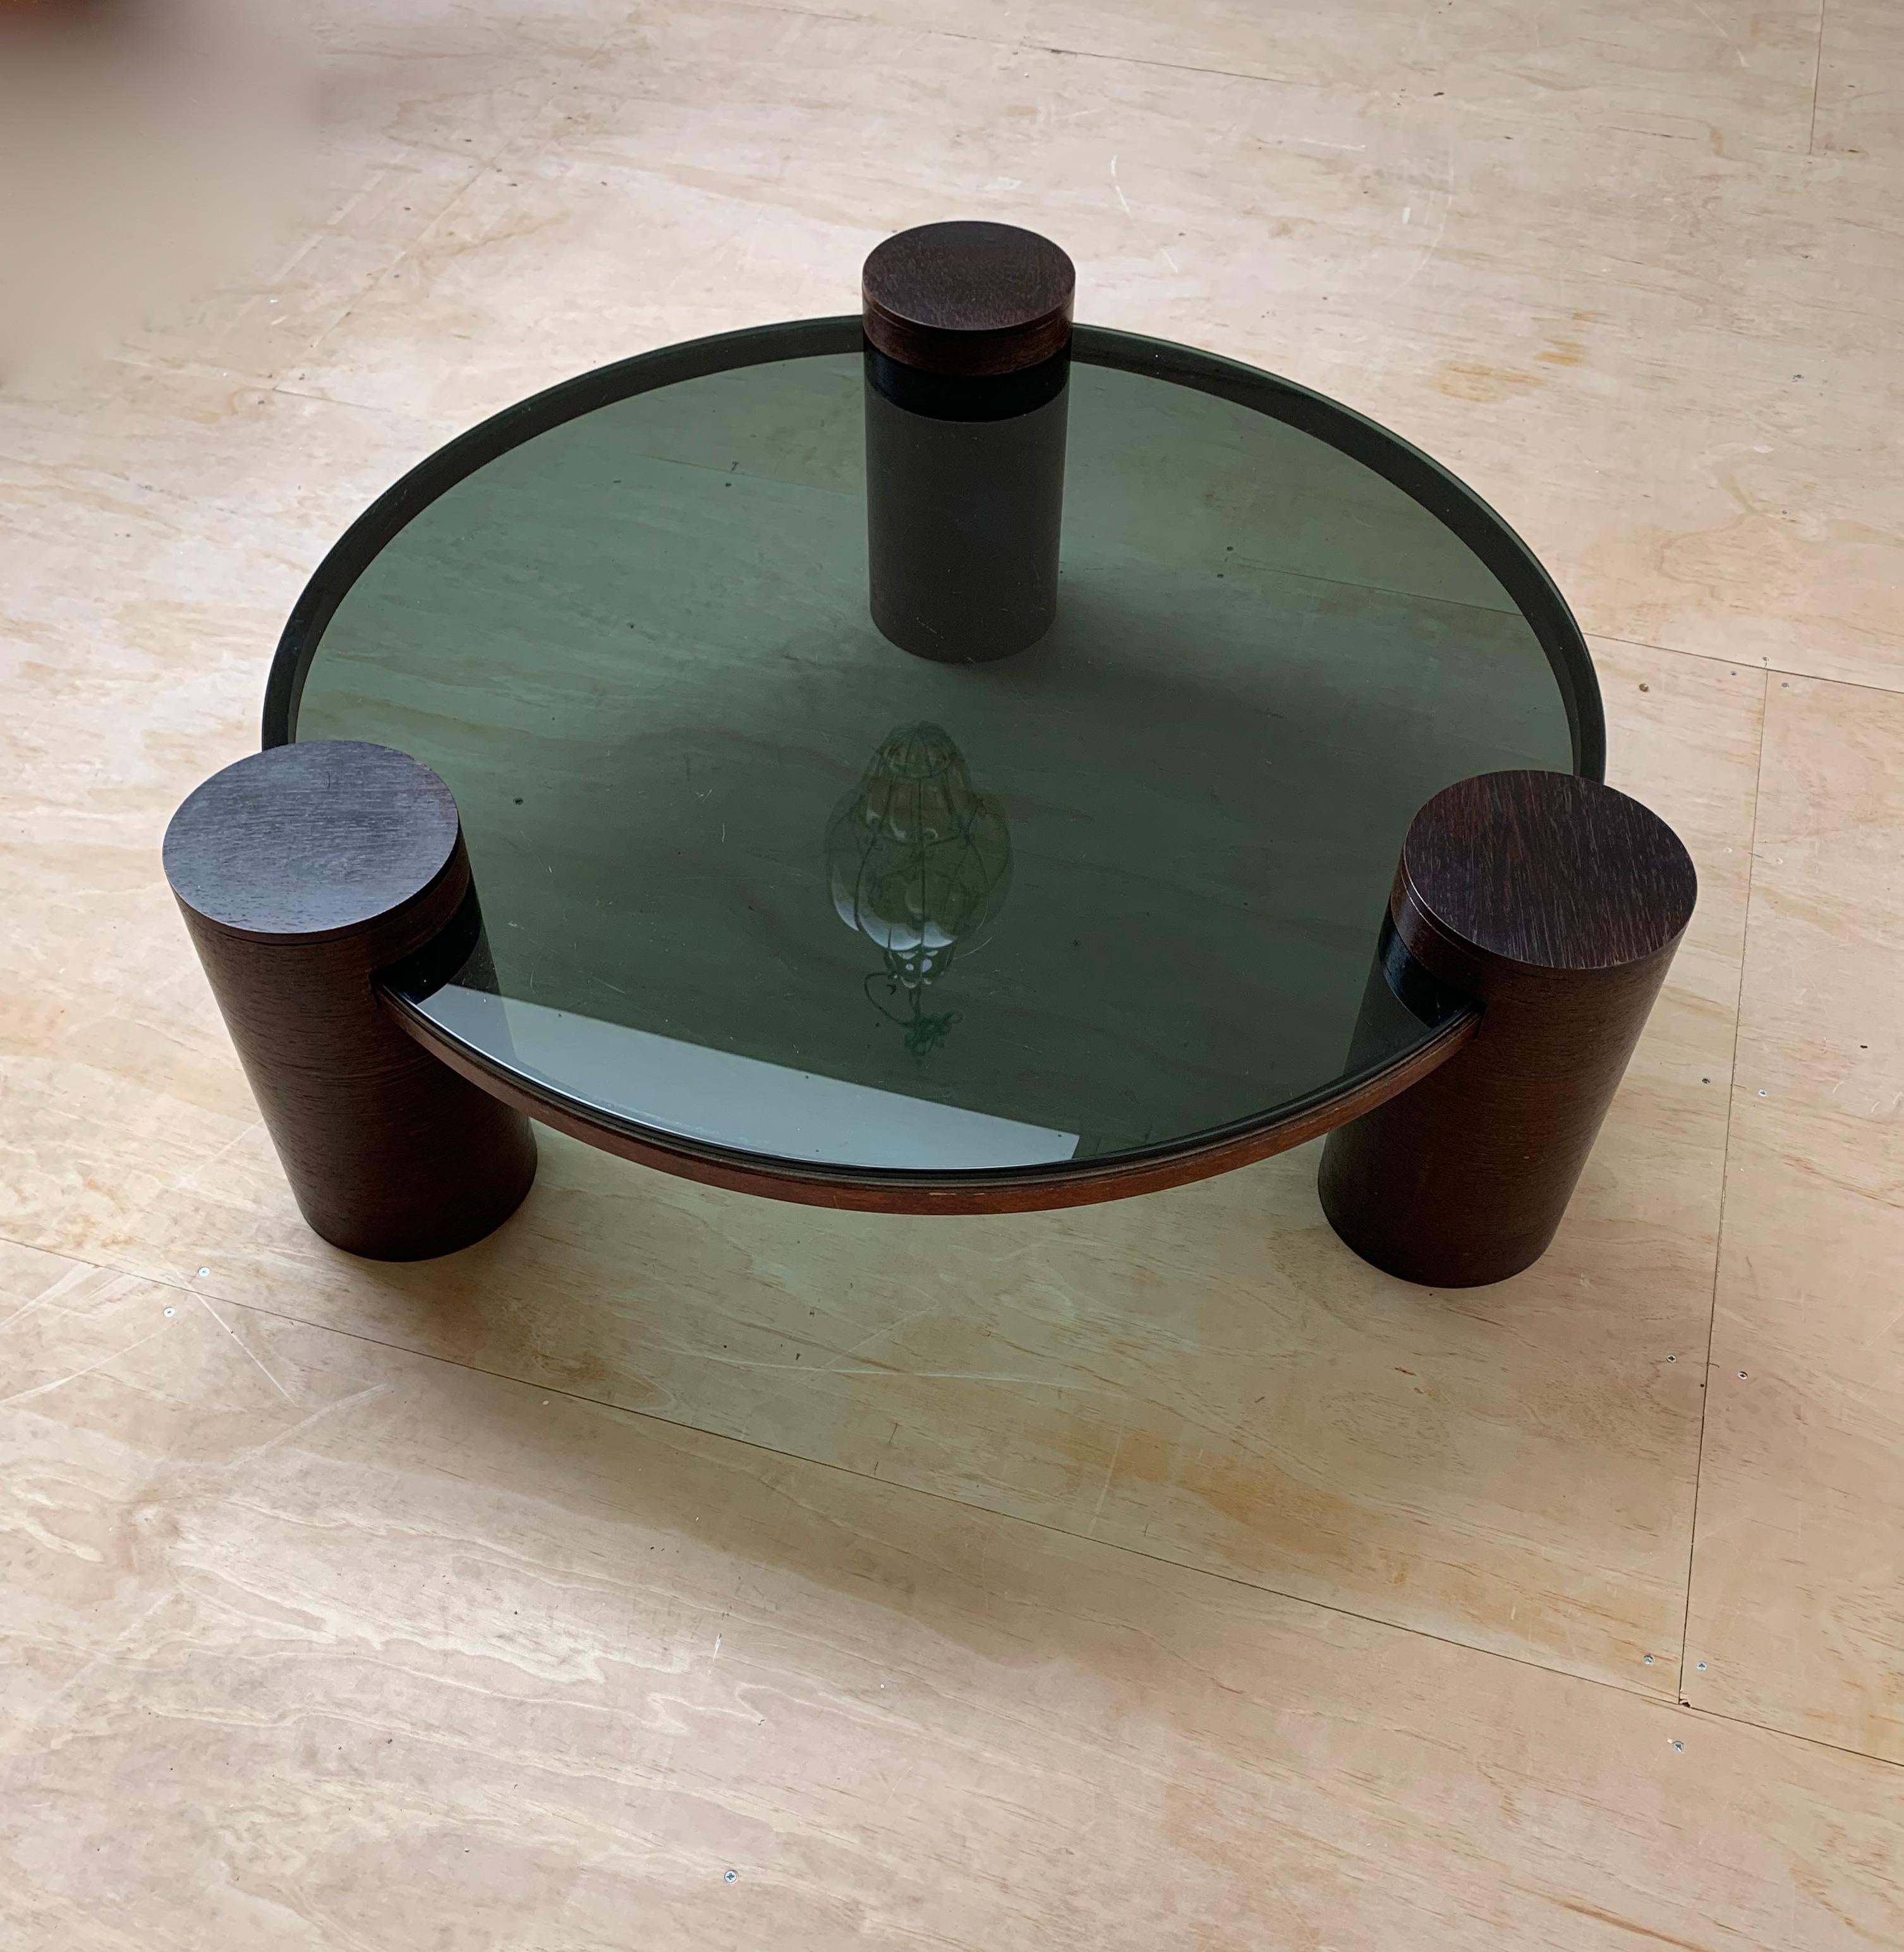 Unique Midcentury Modern Smoked Green Glass Coffee Table w Three Wooden Columns For Sale 9